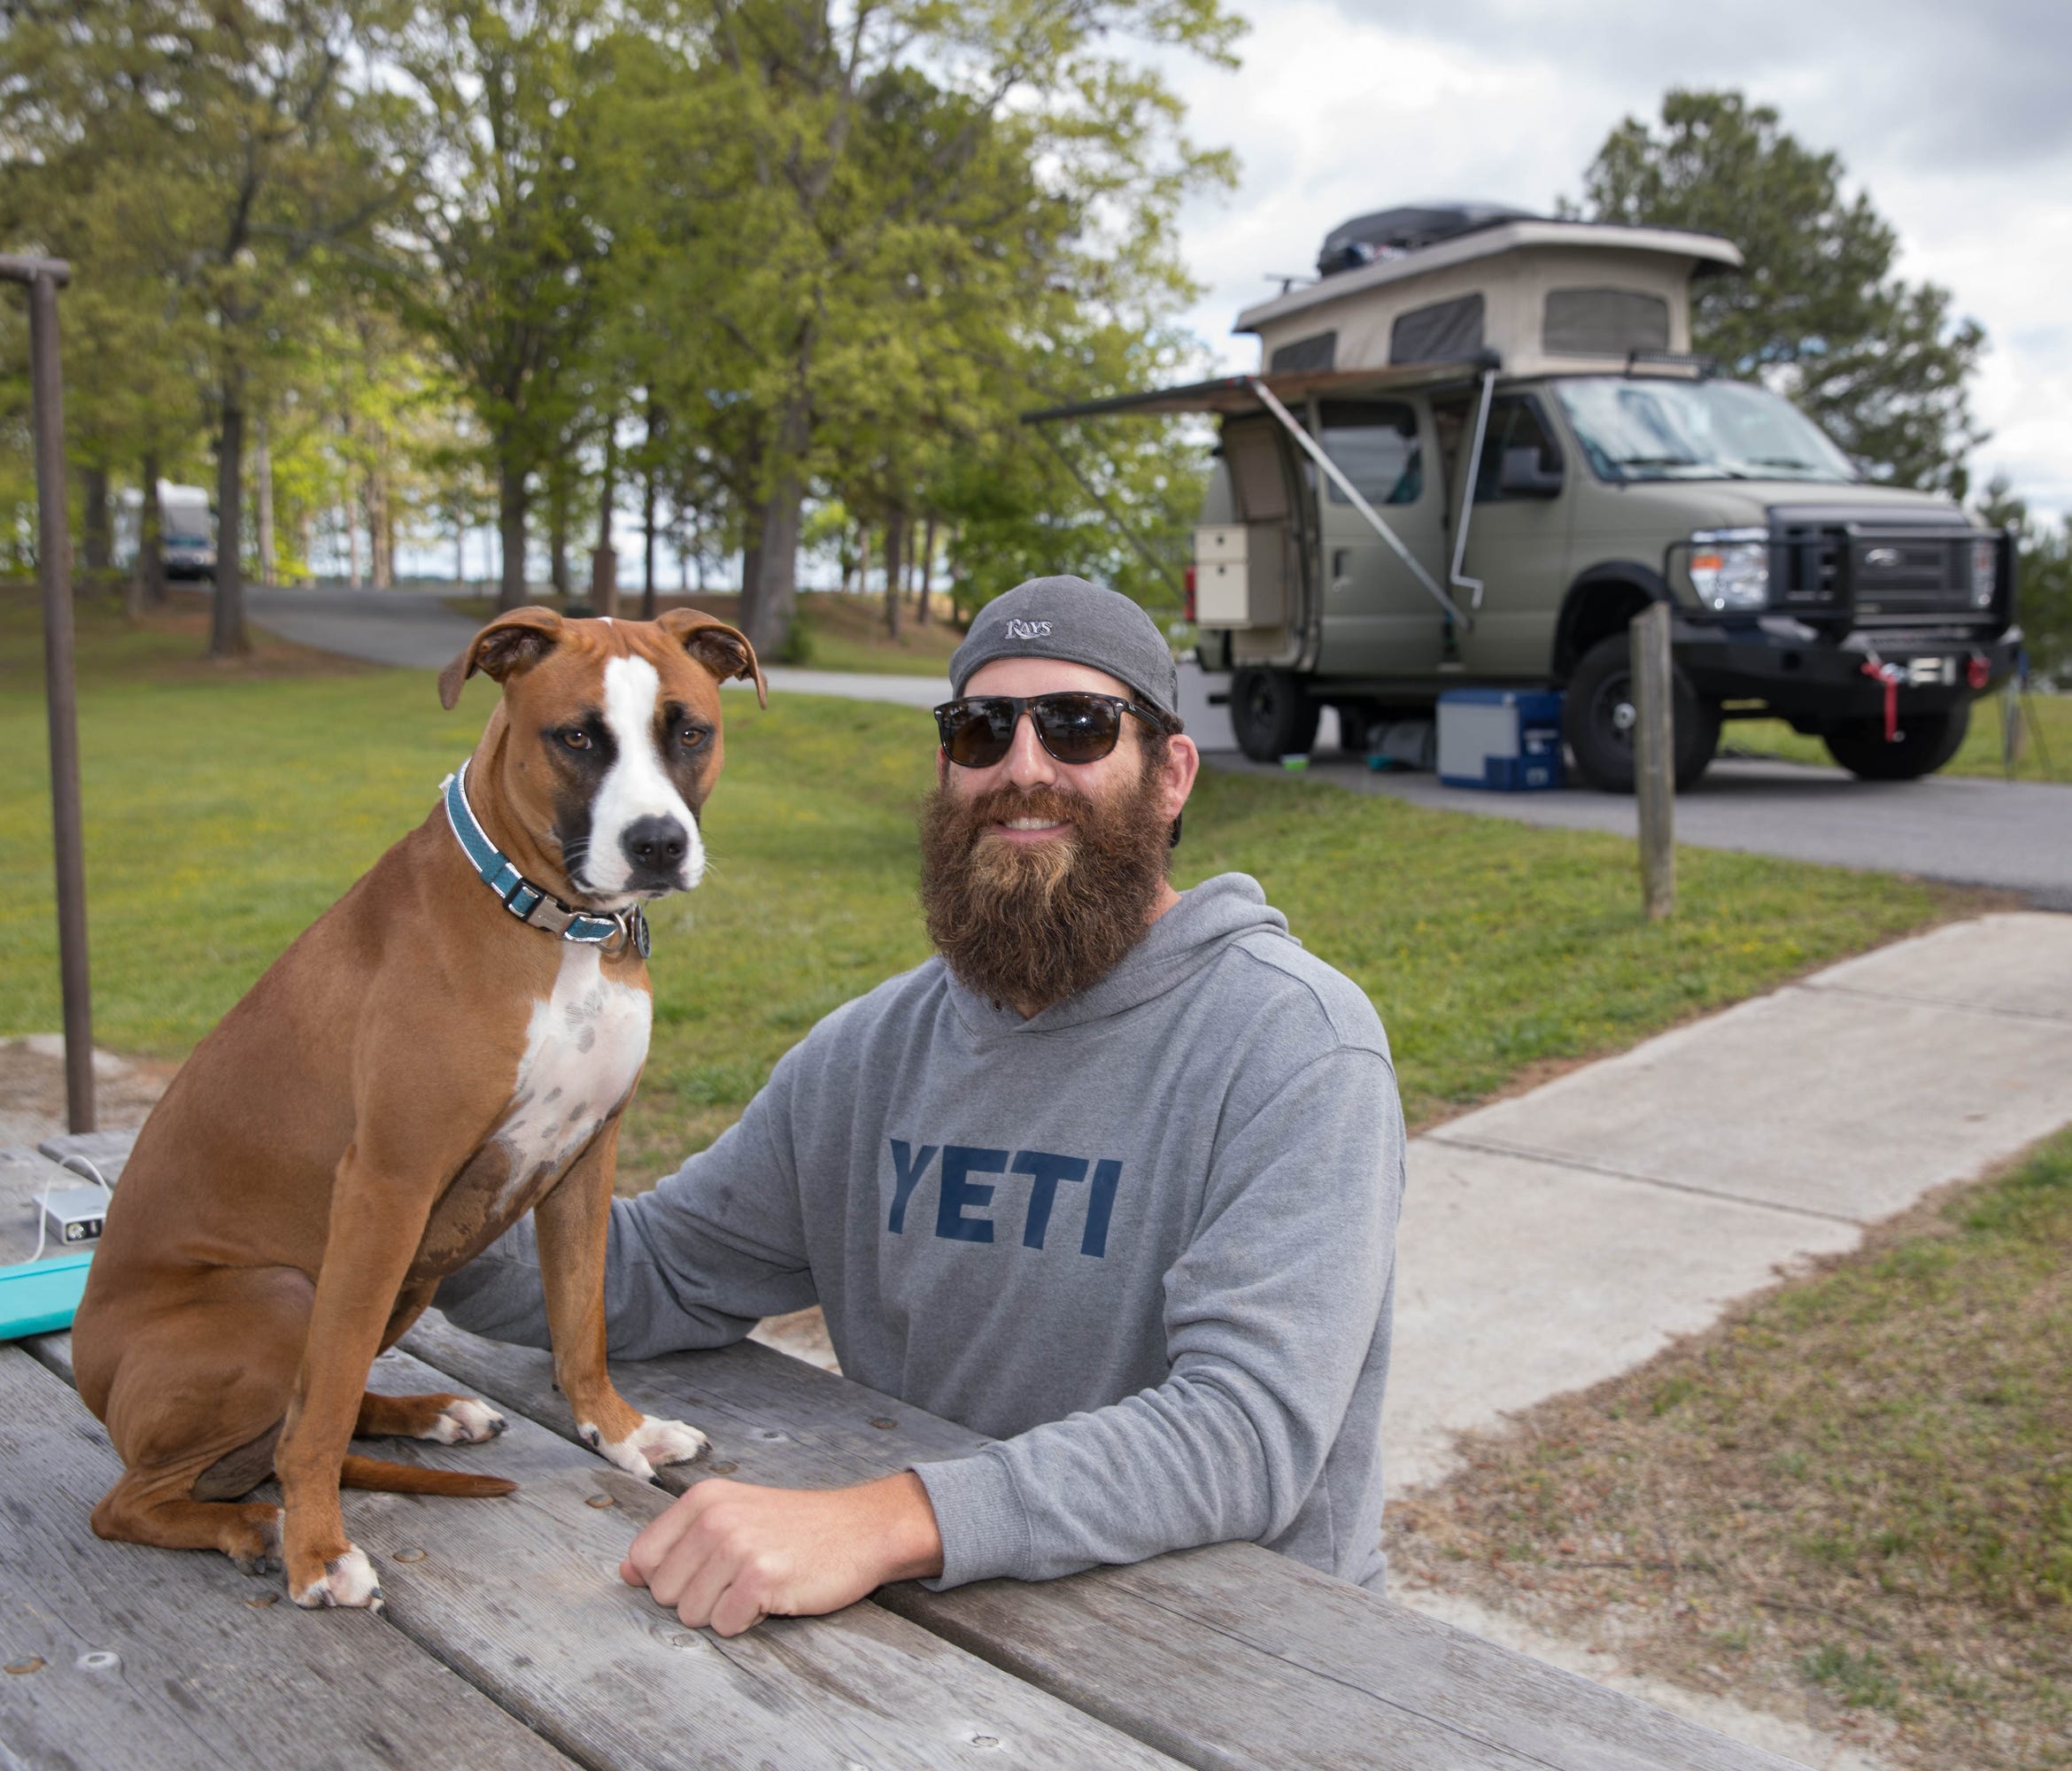 Joe Hawley poses with his 2-year-old boxer-mix Freedom in front of his tricked-out van at the Old Federal Campground on Lake Lanier in Flowery Branch, Ga.